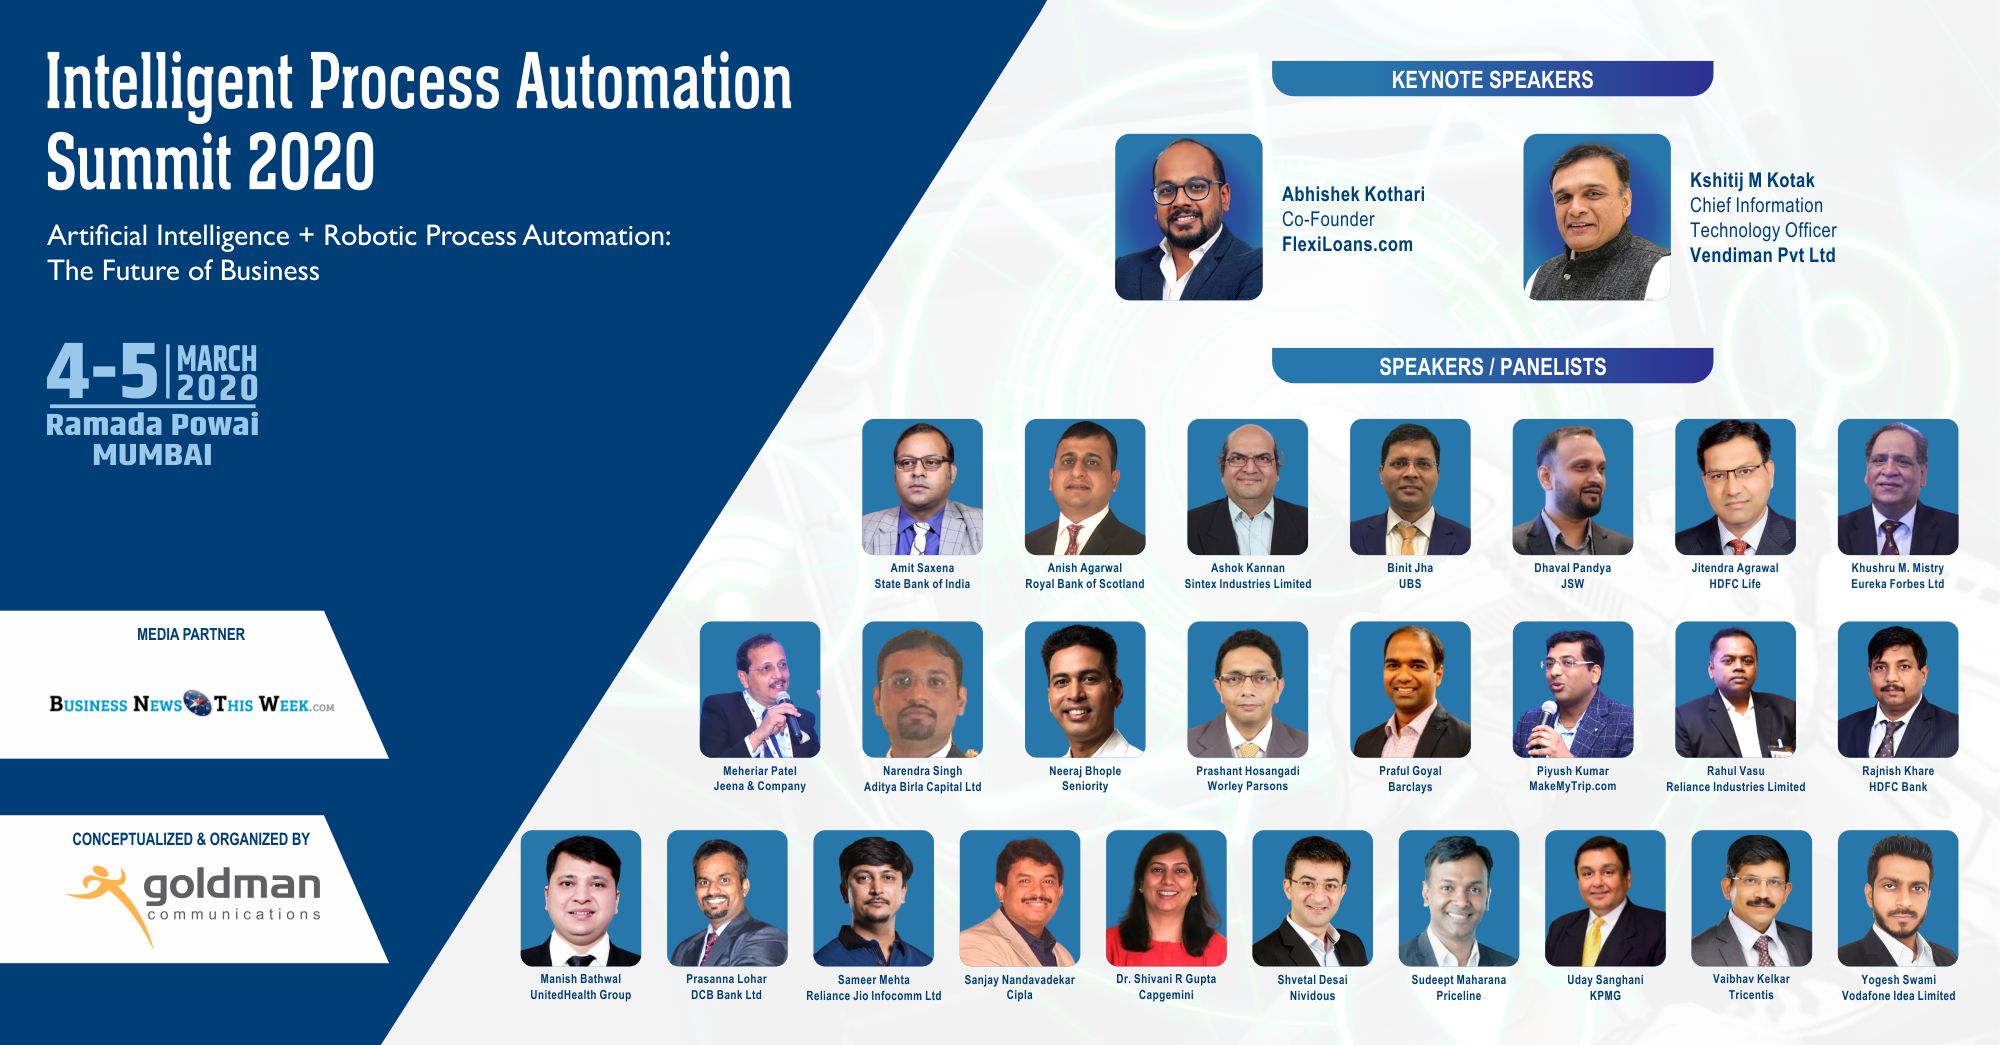 Process Automation, RPA, AI, Machine Learning, Robotic Process Automation, Data, Analytics, Intelligent Process Automation, IoT, ML, Big Data, Deep Learning, Artificial Intelligence, Data Science, Marketing, Business, Cognitive Technology, Chat Bots, Voice Bots